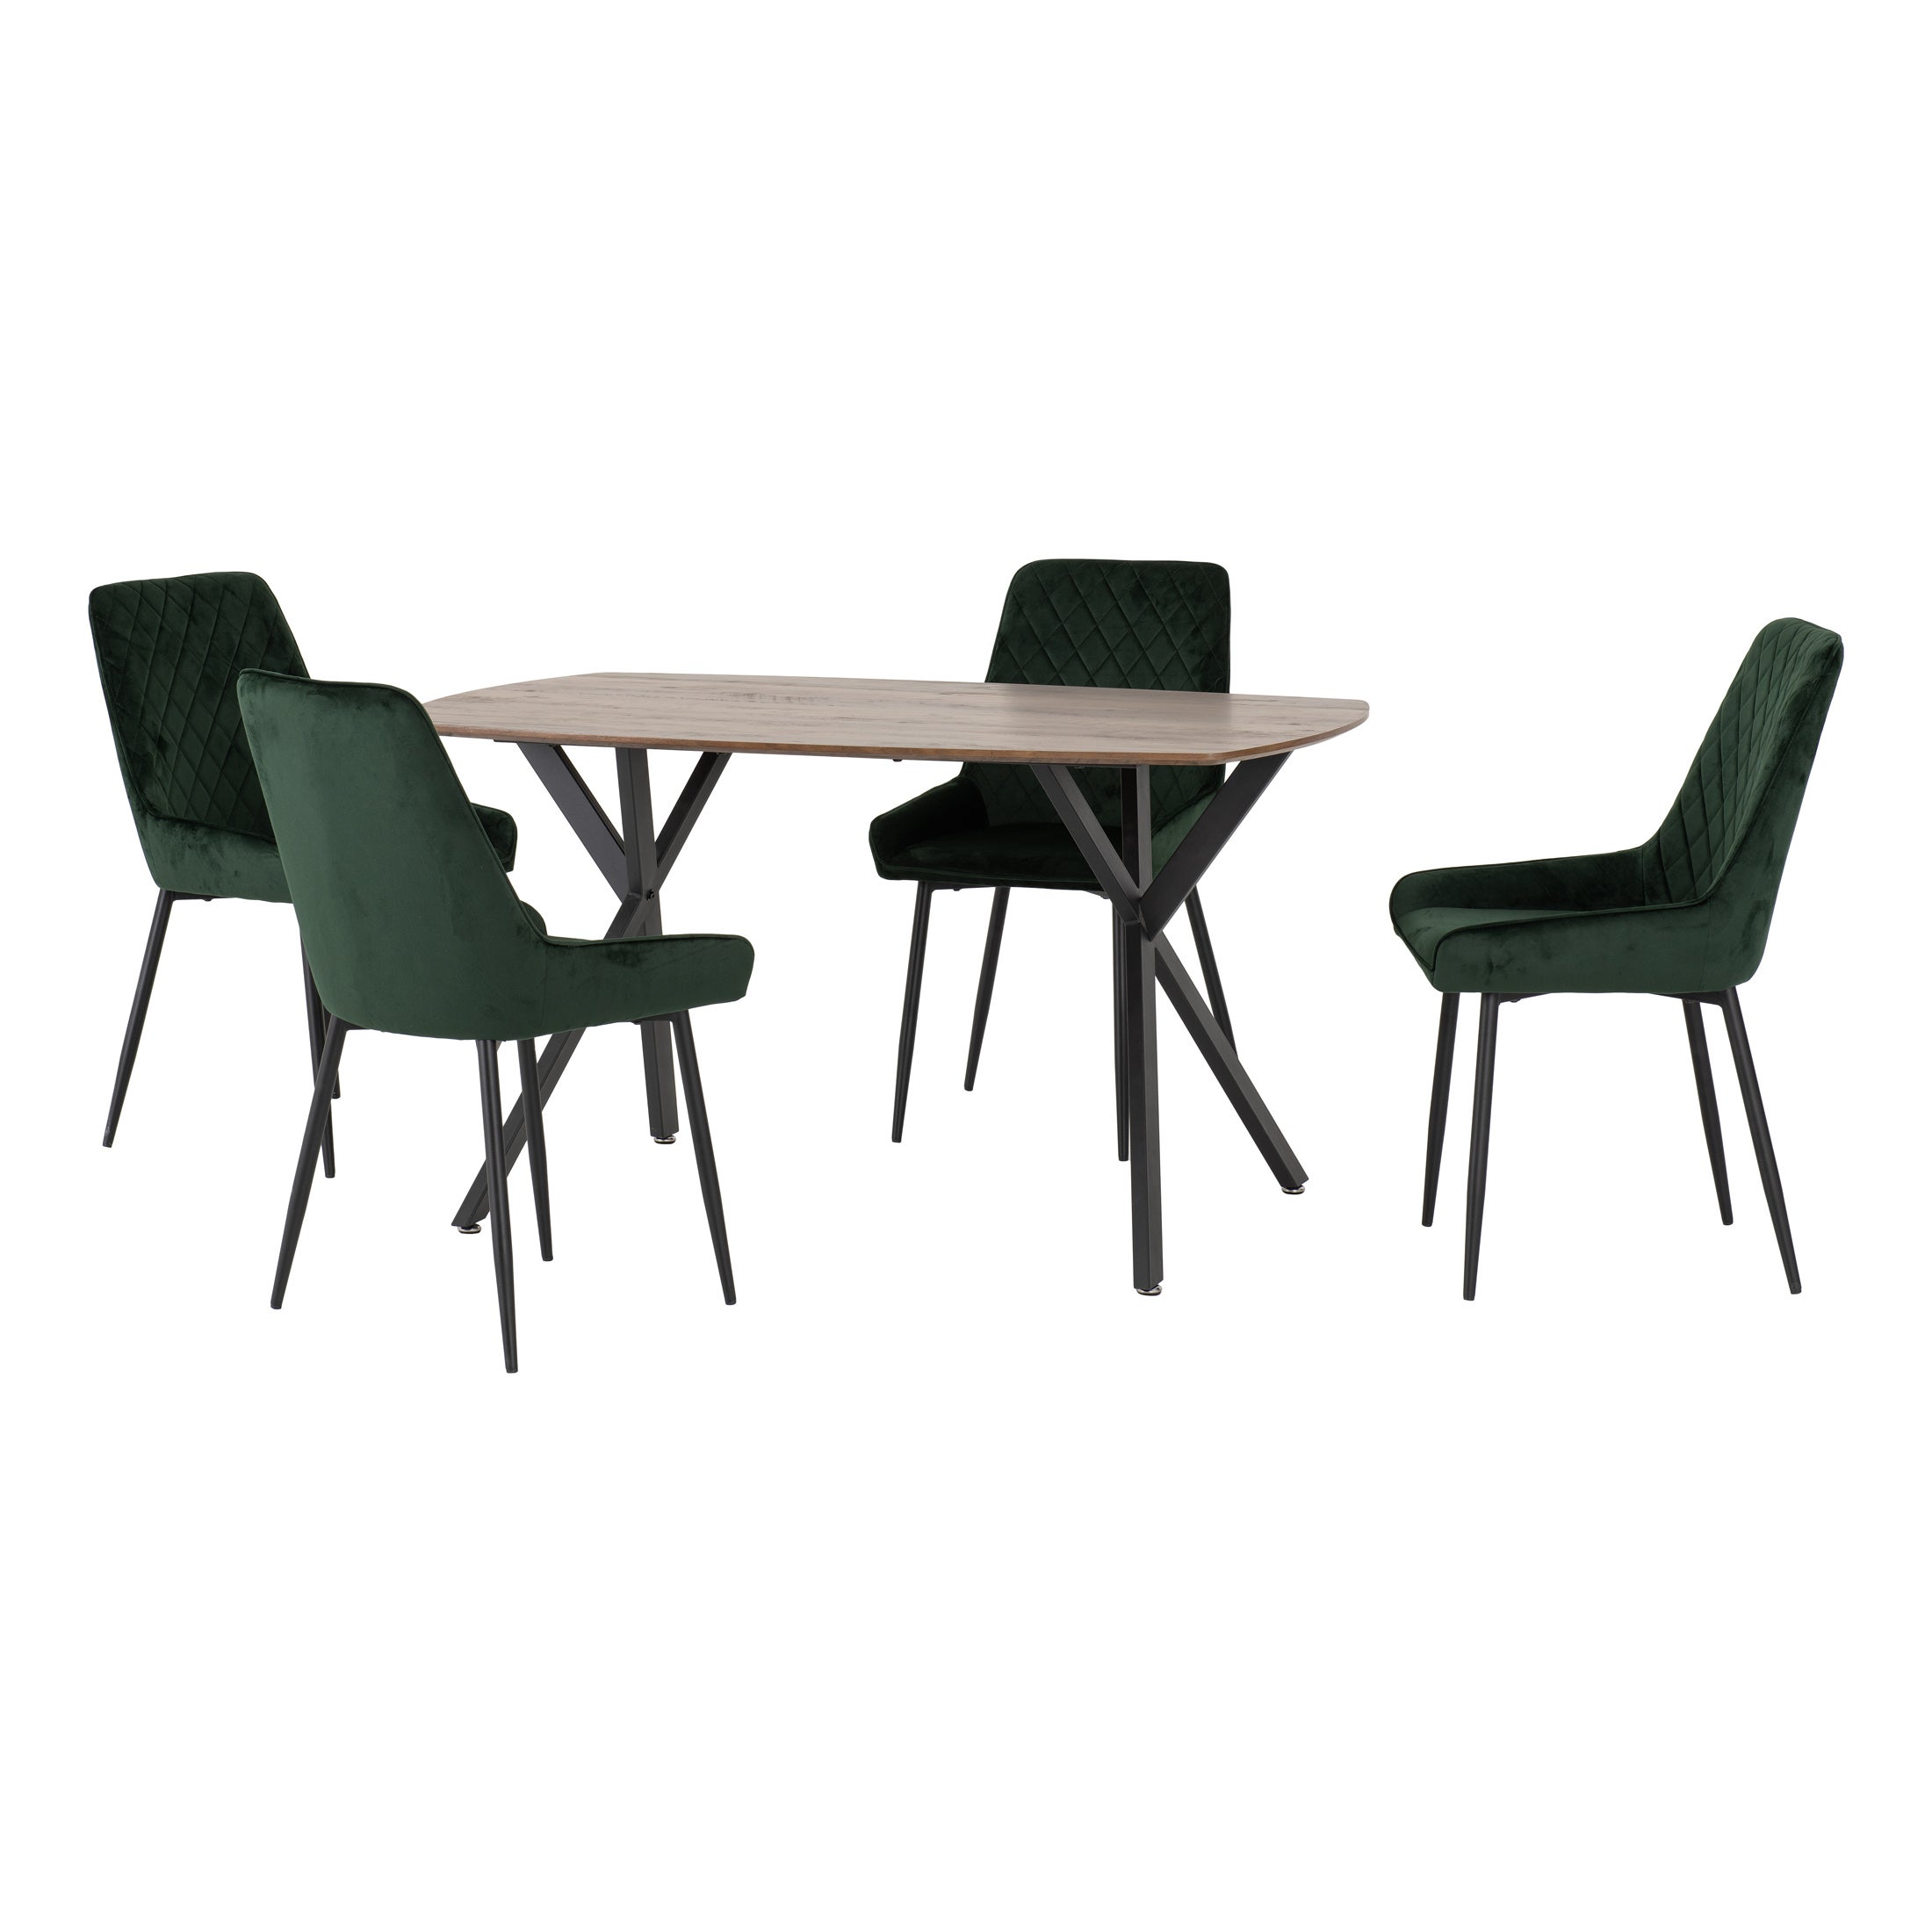 Athens Rectangular Dining Table With 4 Avery Chairs Oak Effect Green